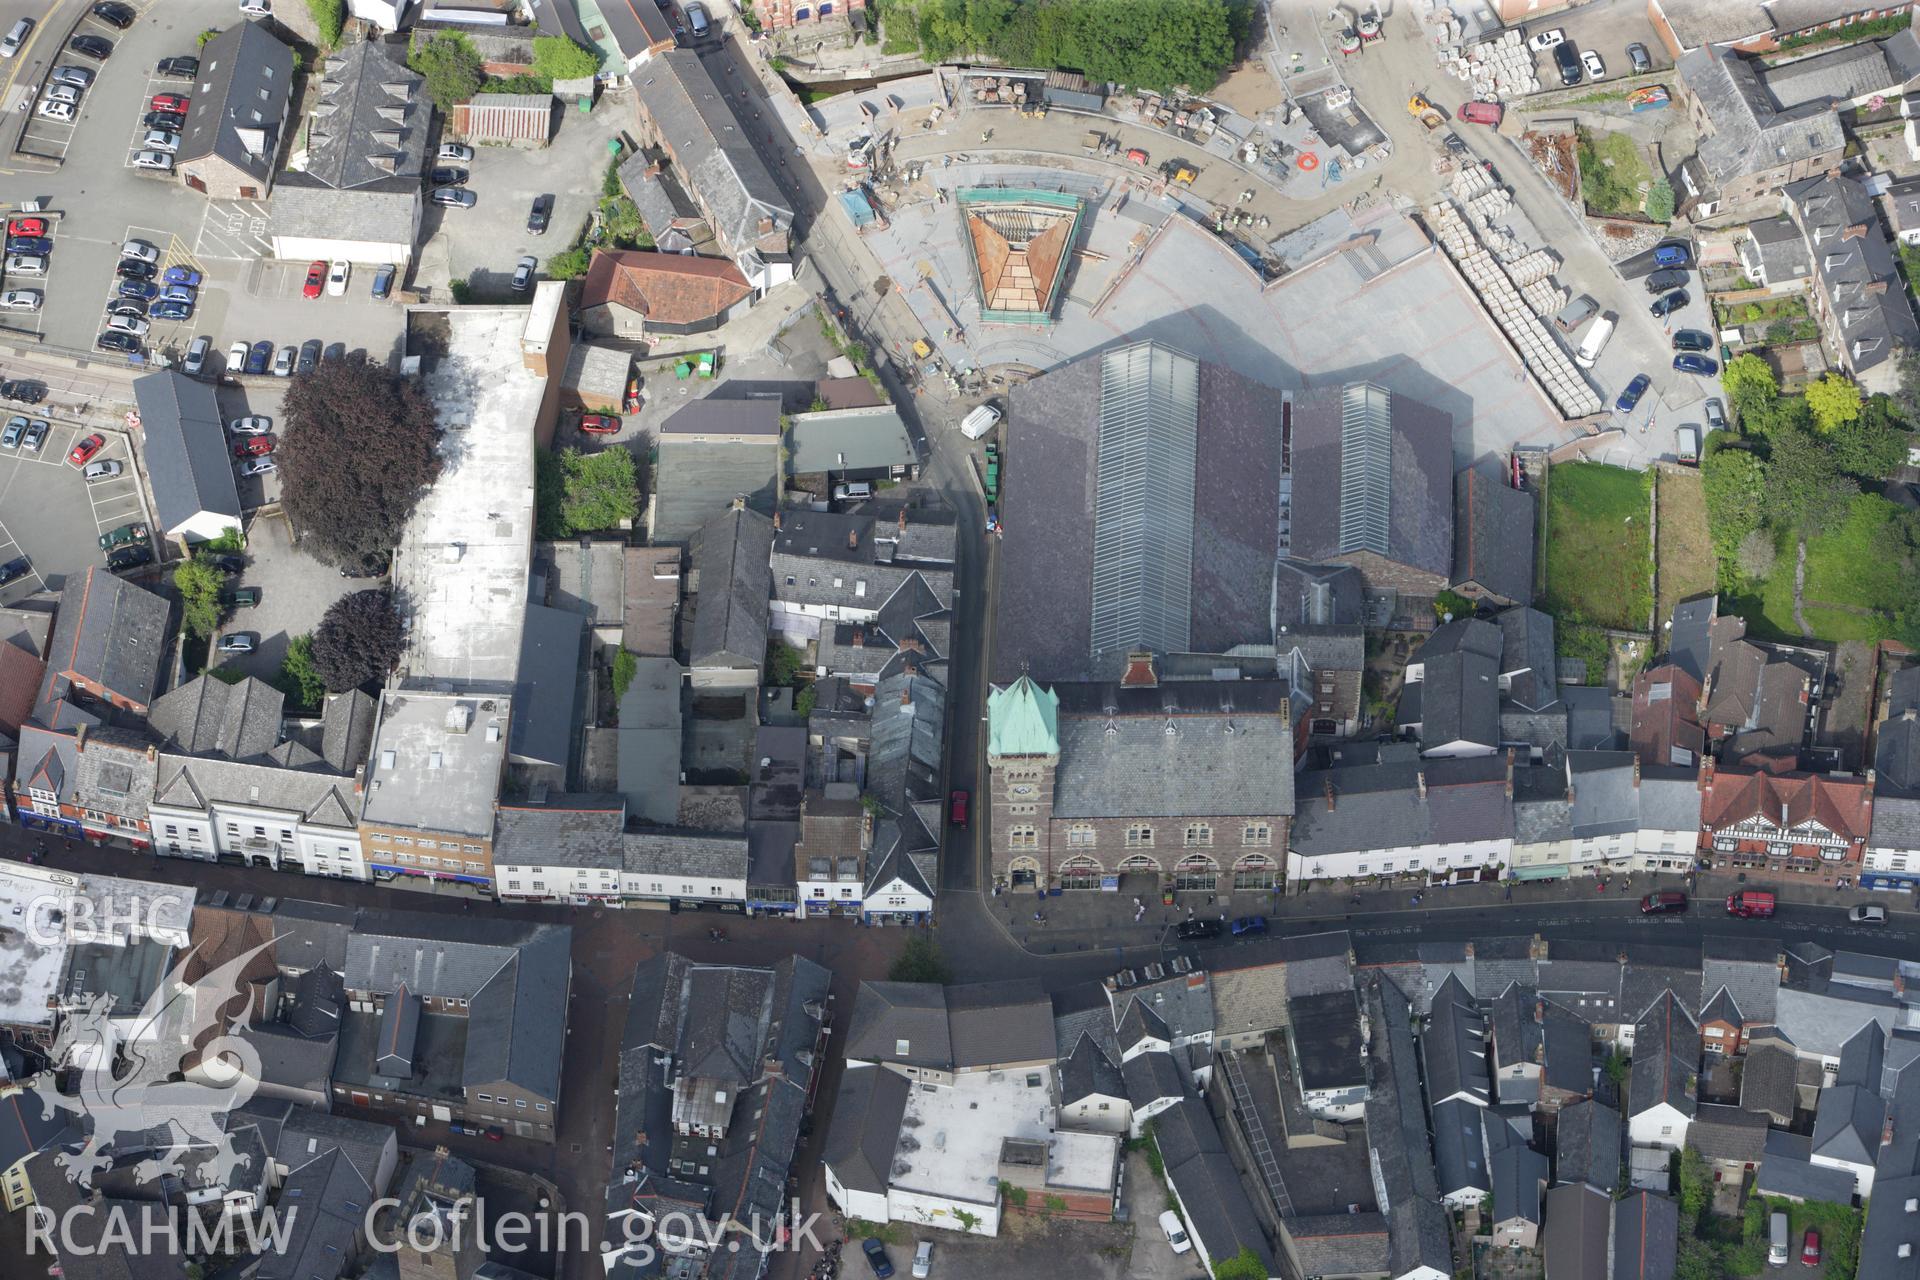 RCAHMW colour oblique aerial photograph of the town hall and adjacent market hall, Abergavenny. Taken on 23 July 2009 by Toby Driver